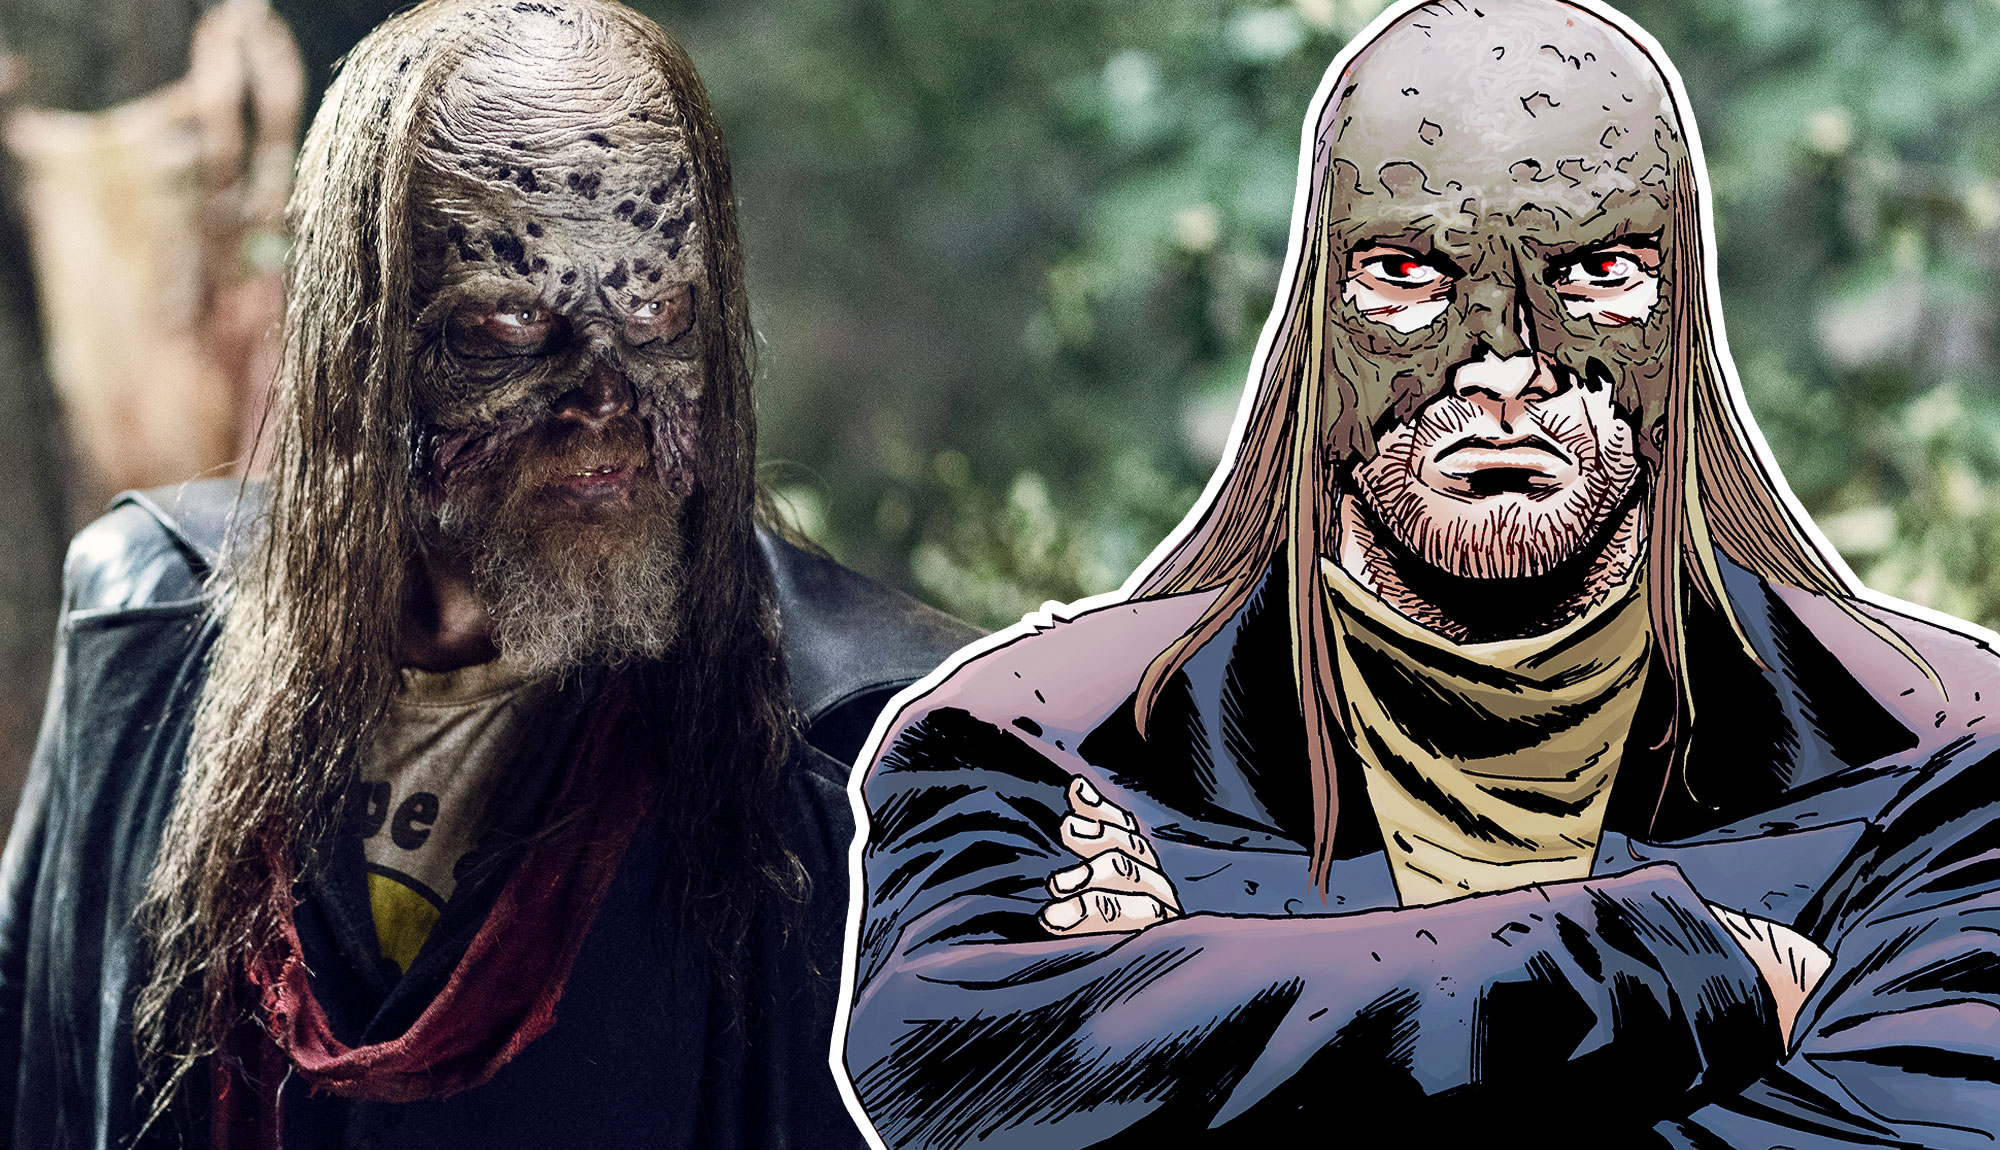 All The Ways Beta Compares to His Counterpart In The Walking Dead Comics